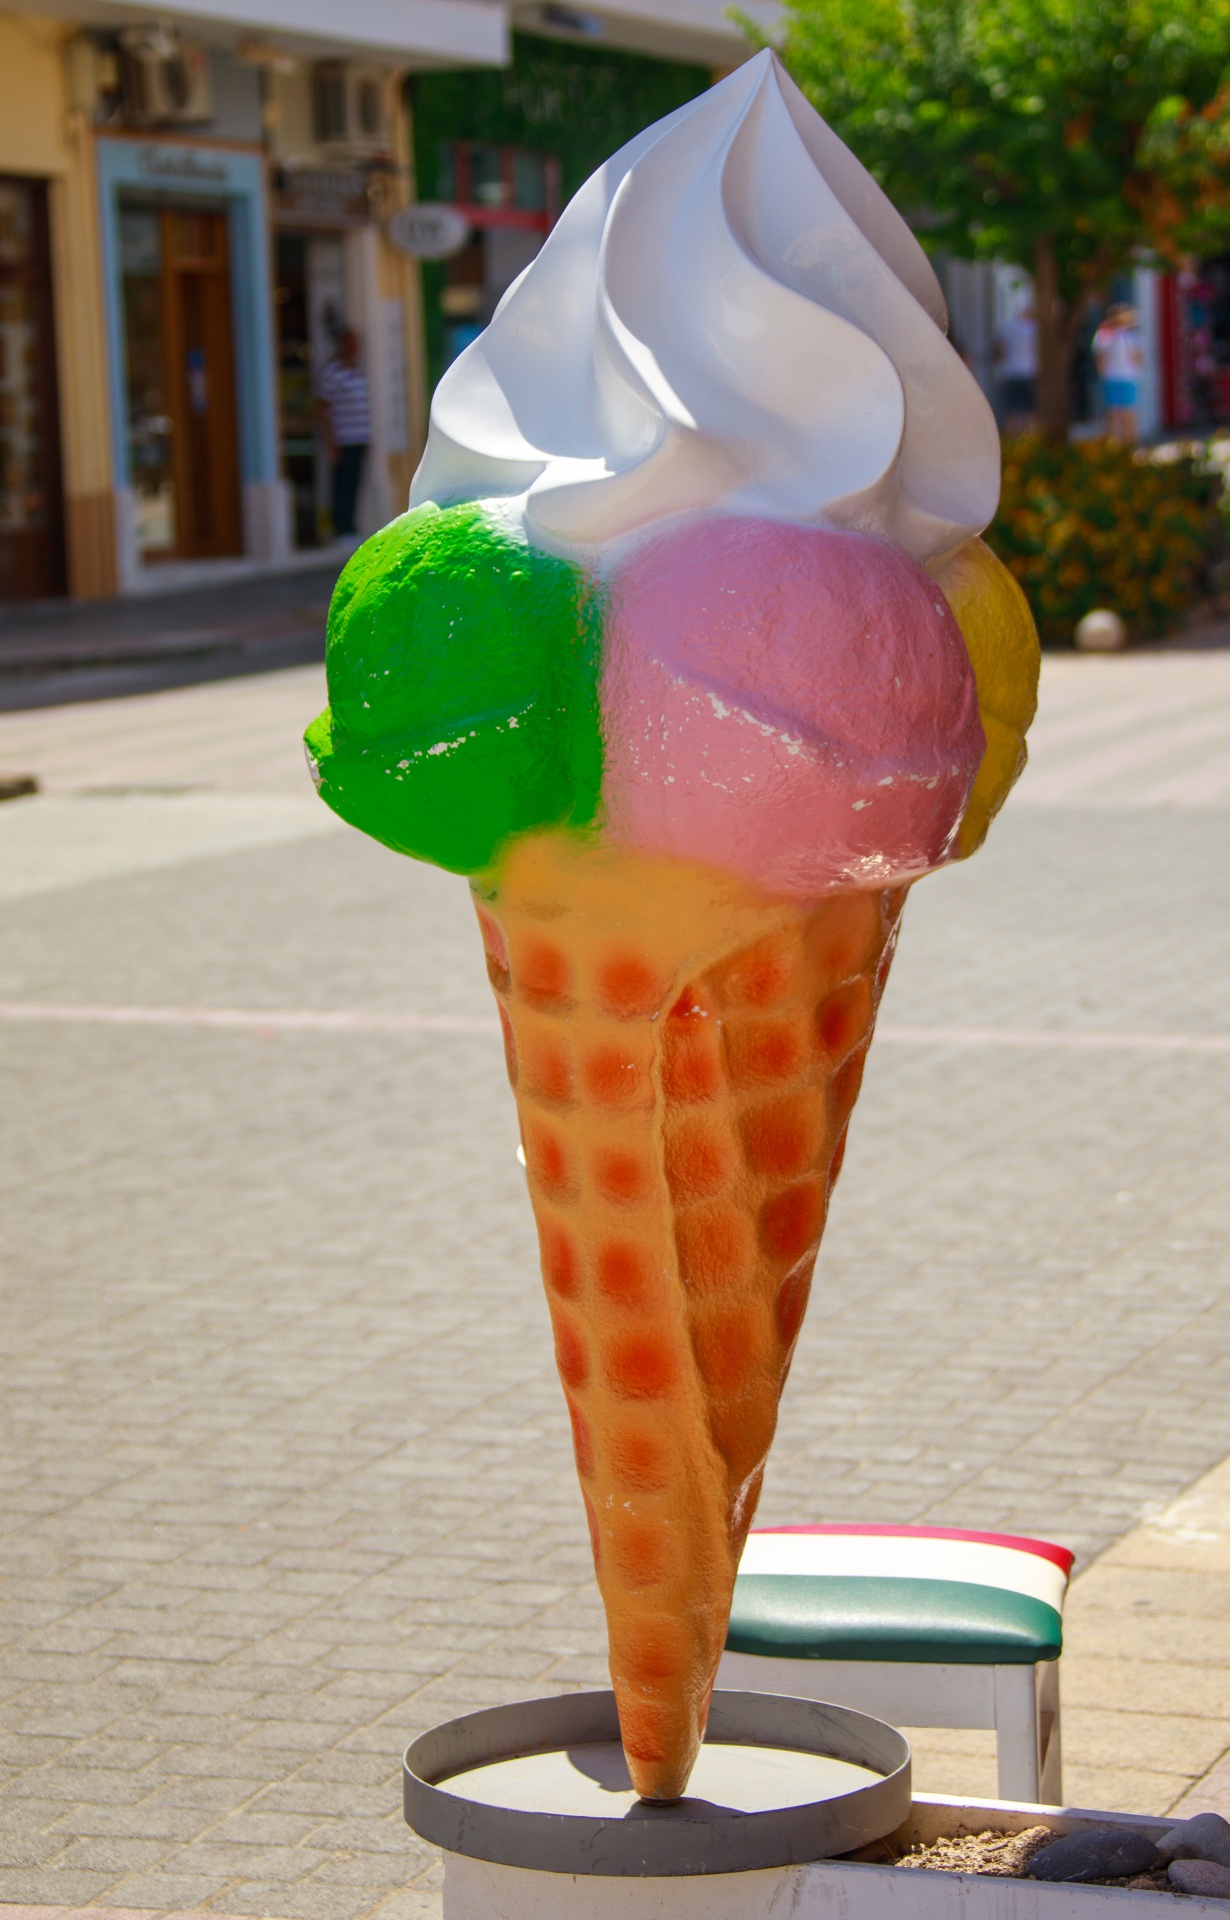 Large colorful plastic ice cream cone sign next to a business which sells ice cream